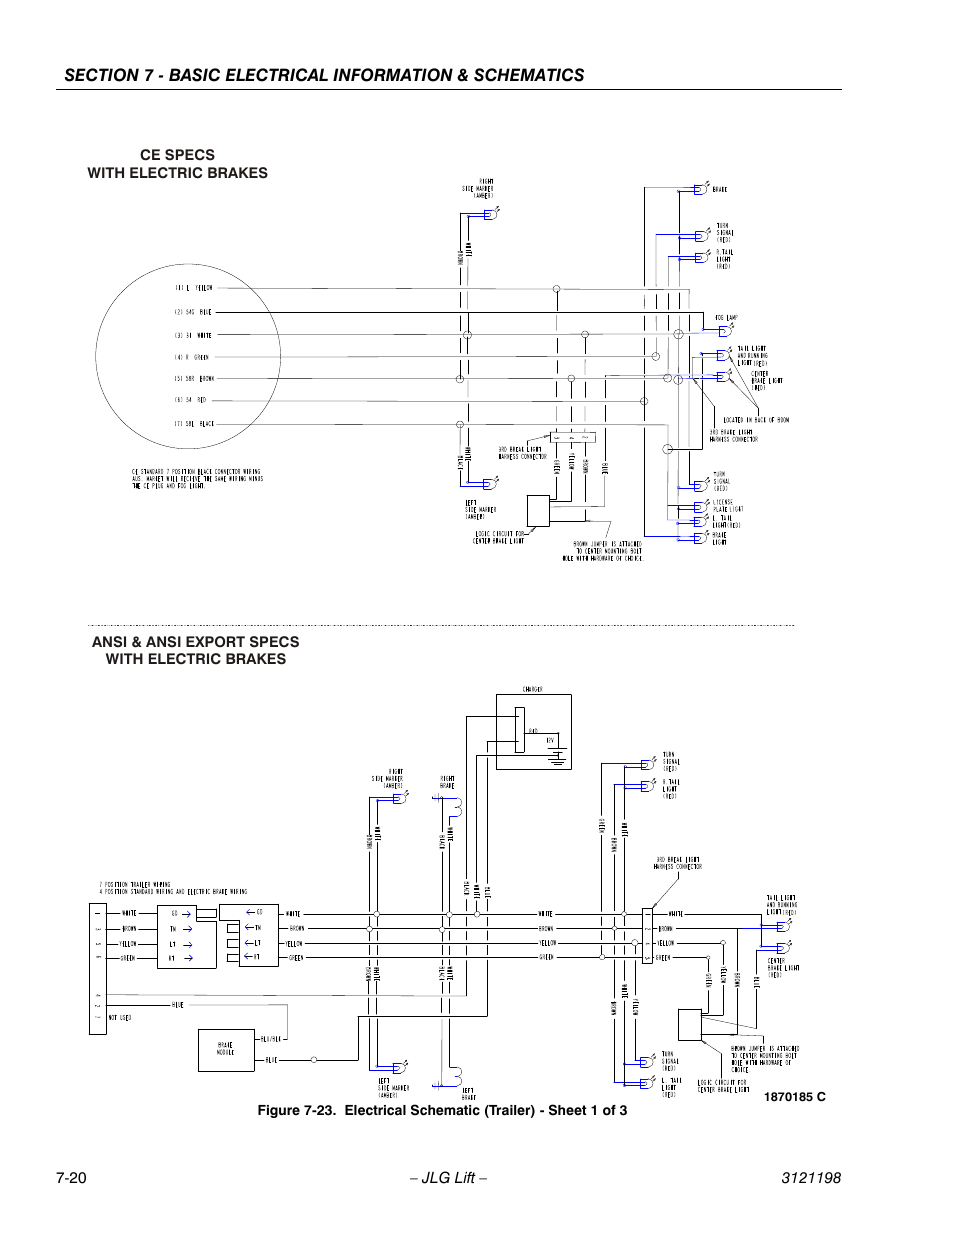 Electrical schematic (trailer) - sheet 1 of 3 -20 | JLG T350 Service Manual User Manual | Page 216 / 230